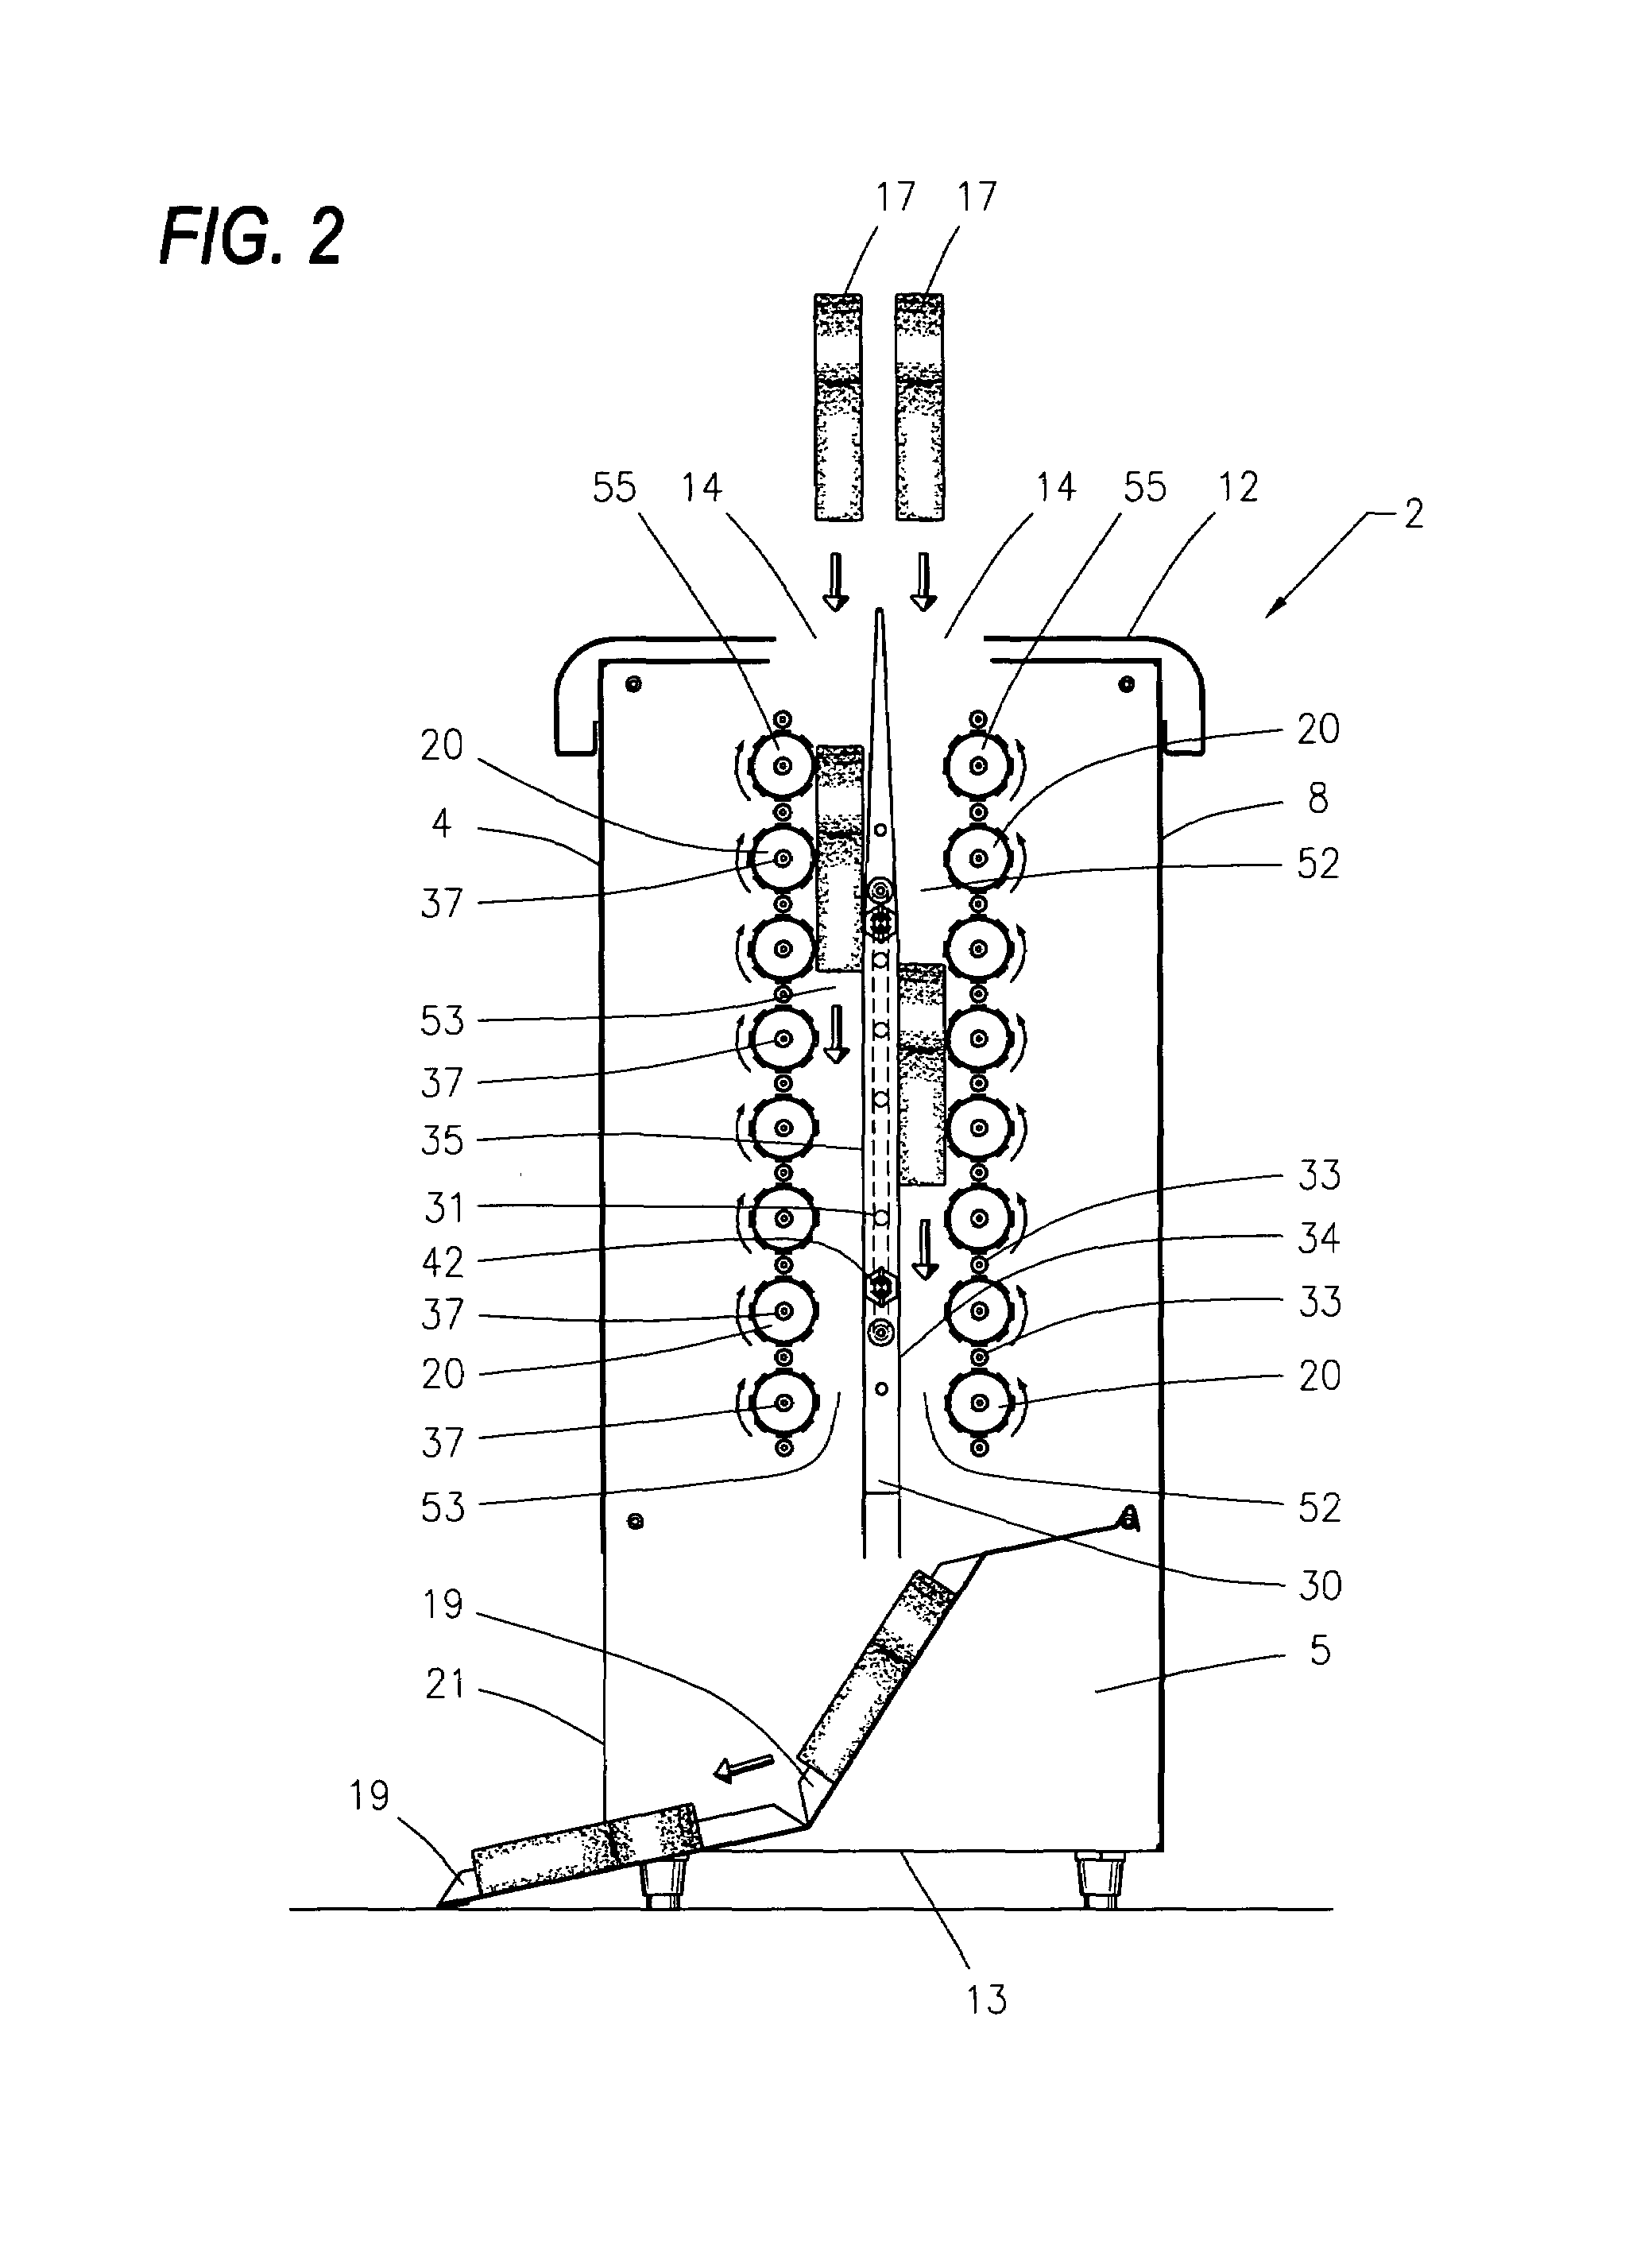 Apparatus and method for a chain motivated toaster with vertically aligned rollers